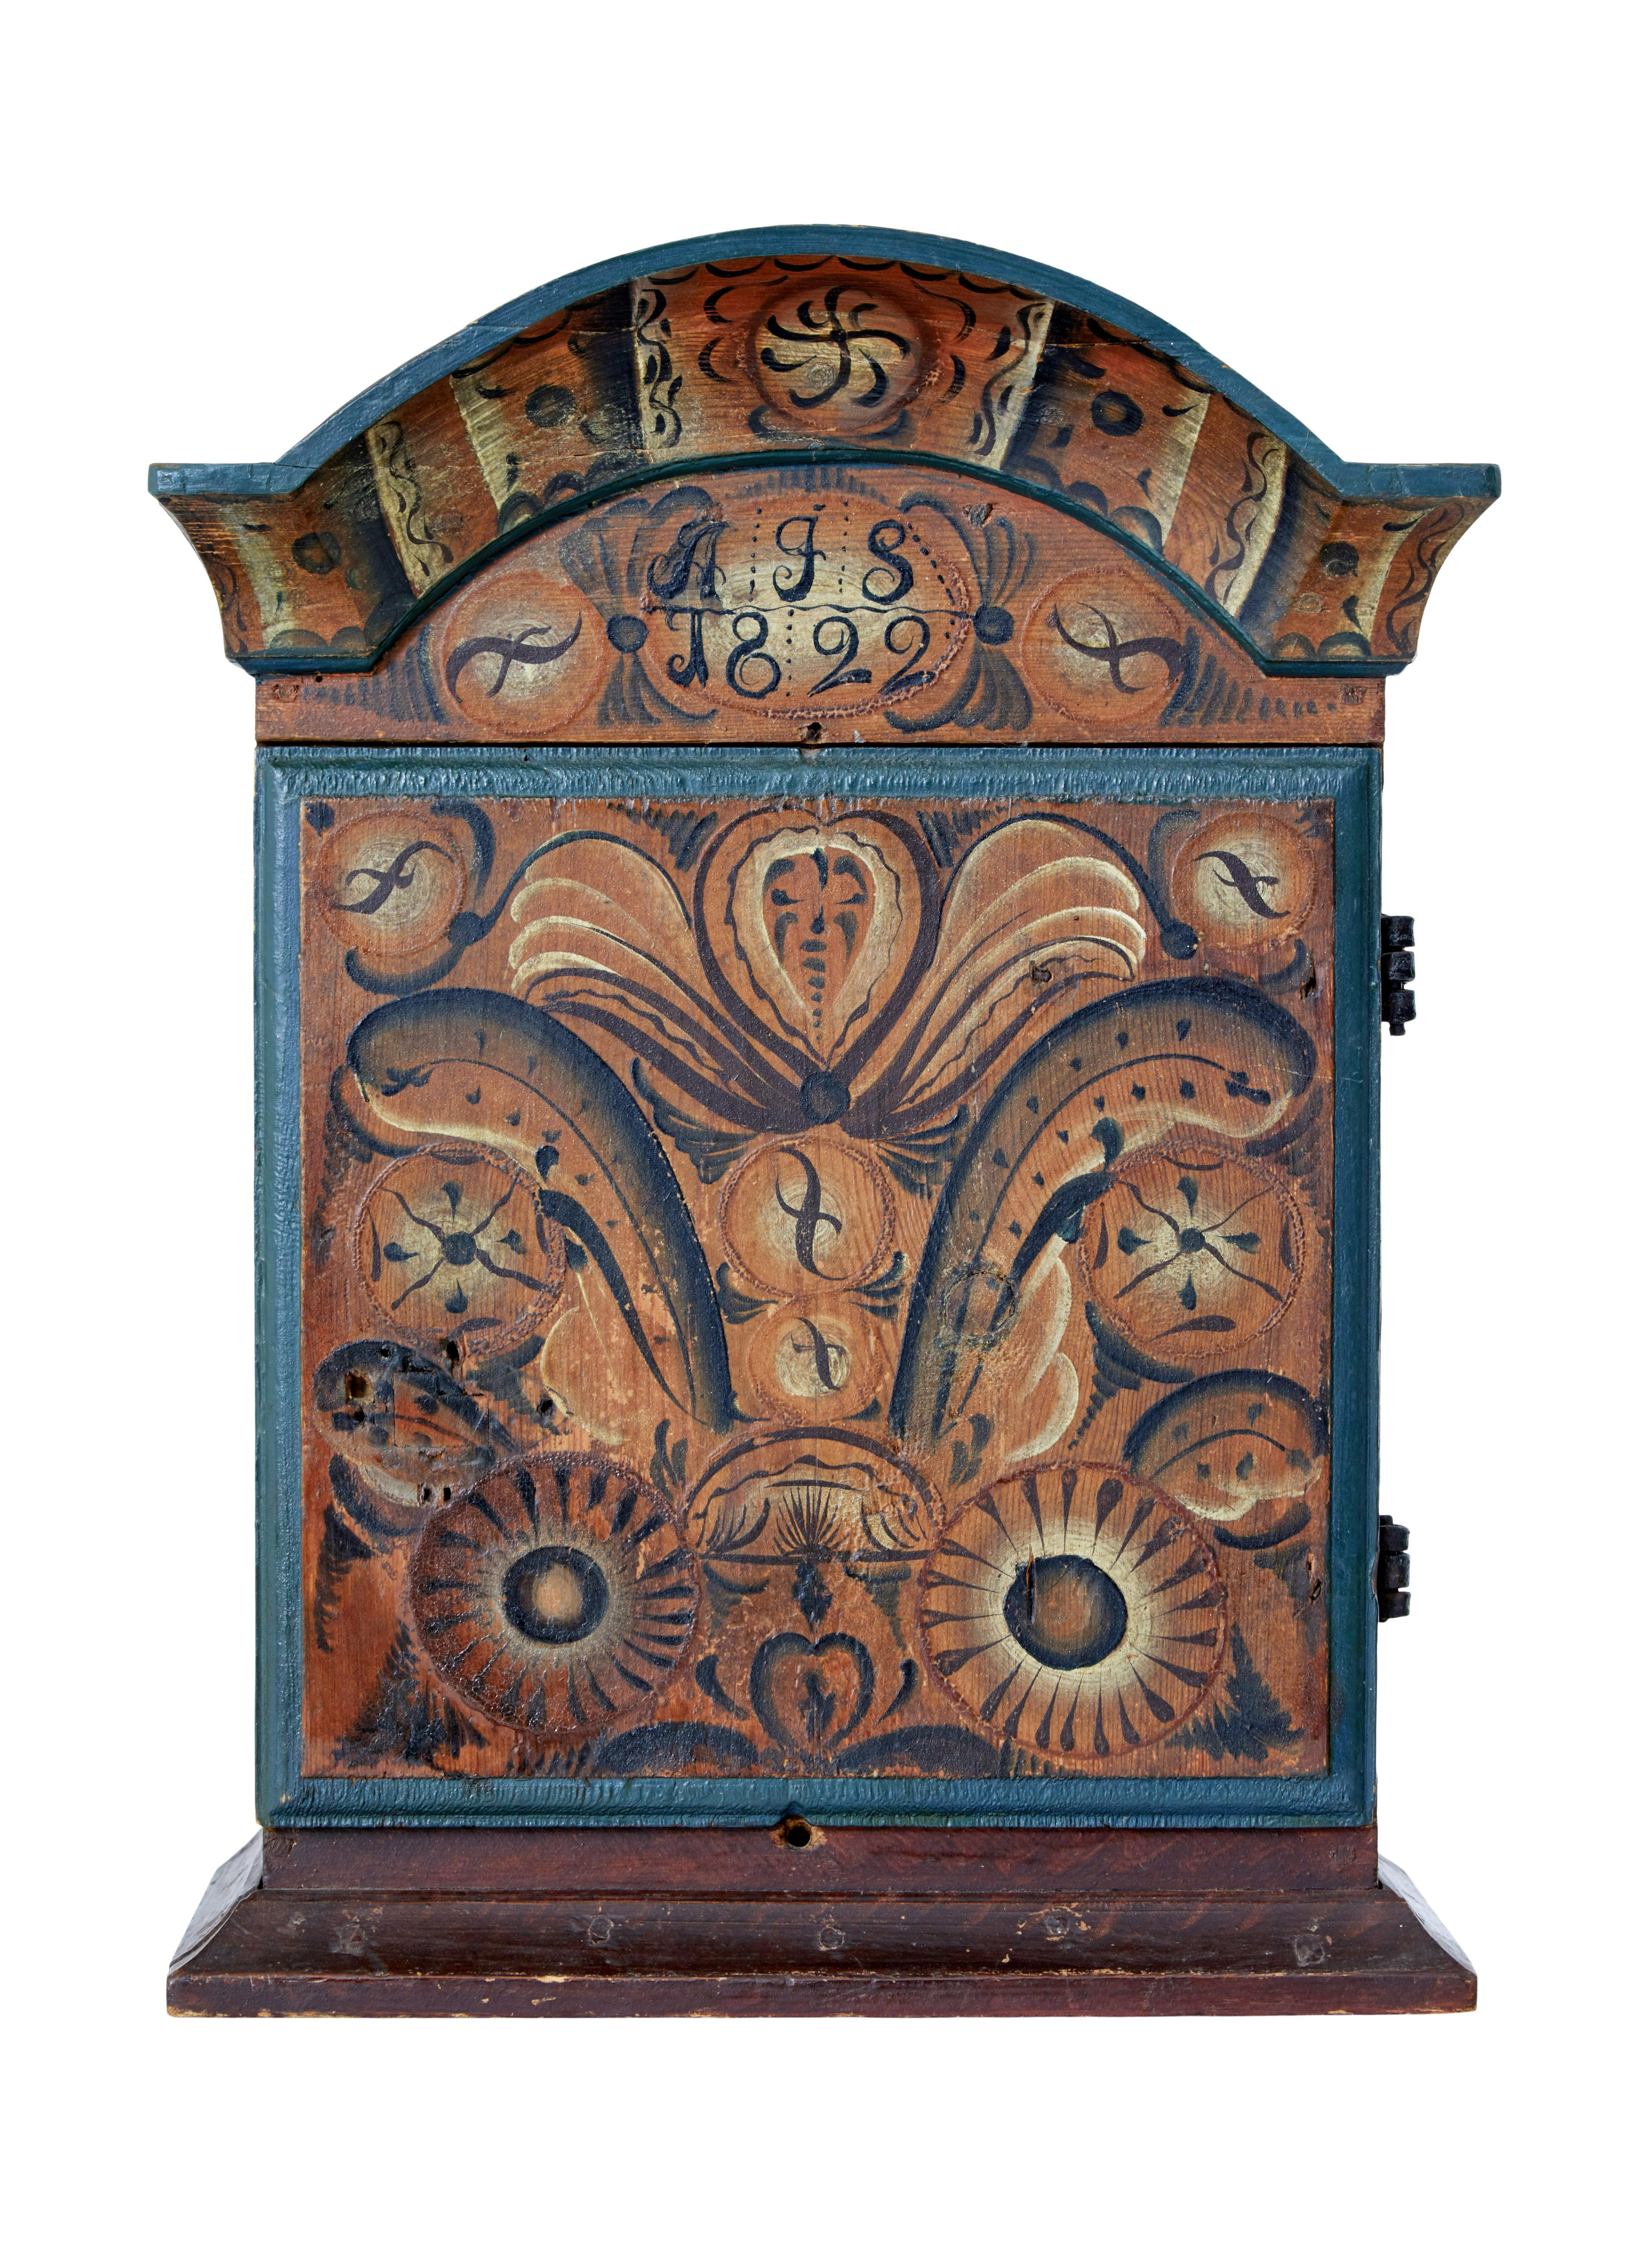 Early 19th century swedish painted wall cupboard circa 1822.

Fine quality dalarna region wall cupboard.  Hand painted in orange, reds and greens.  Shaped cornice below which the initials a.F.S and dated 1822.  Profusely covered in hand painted